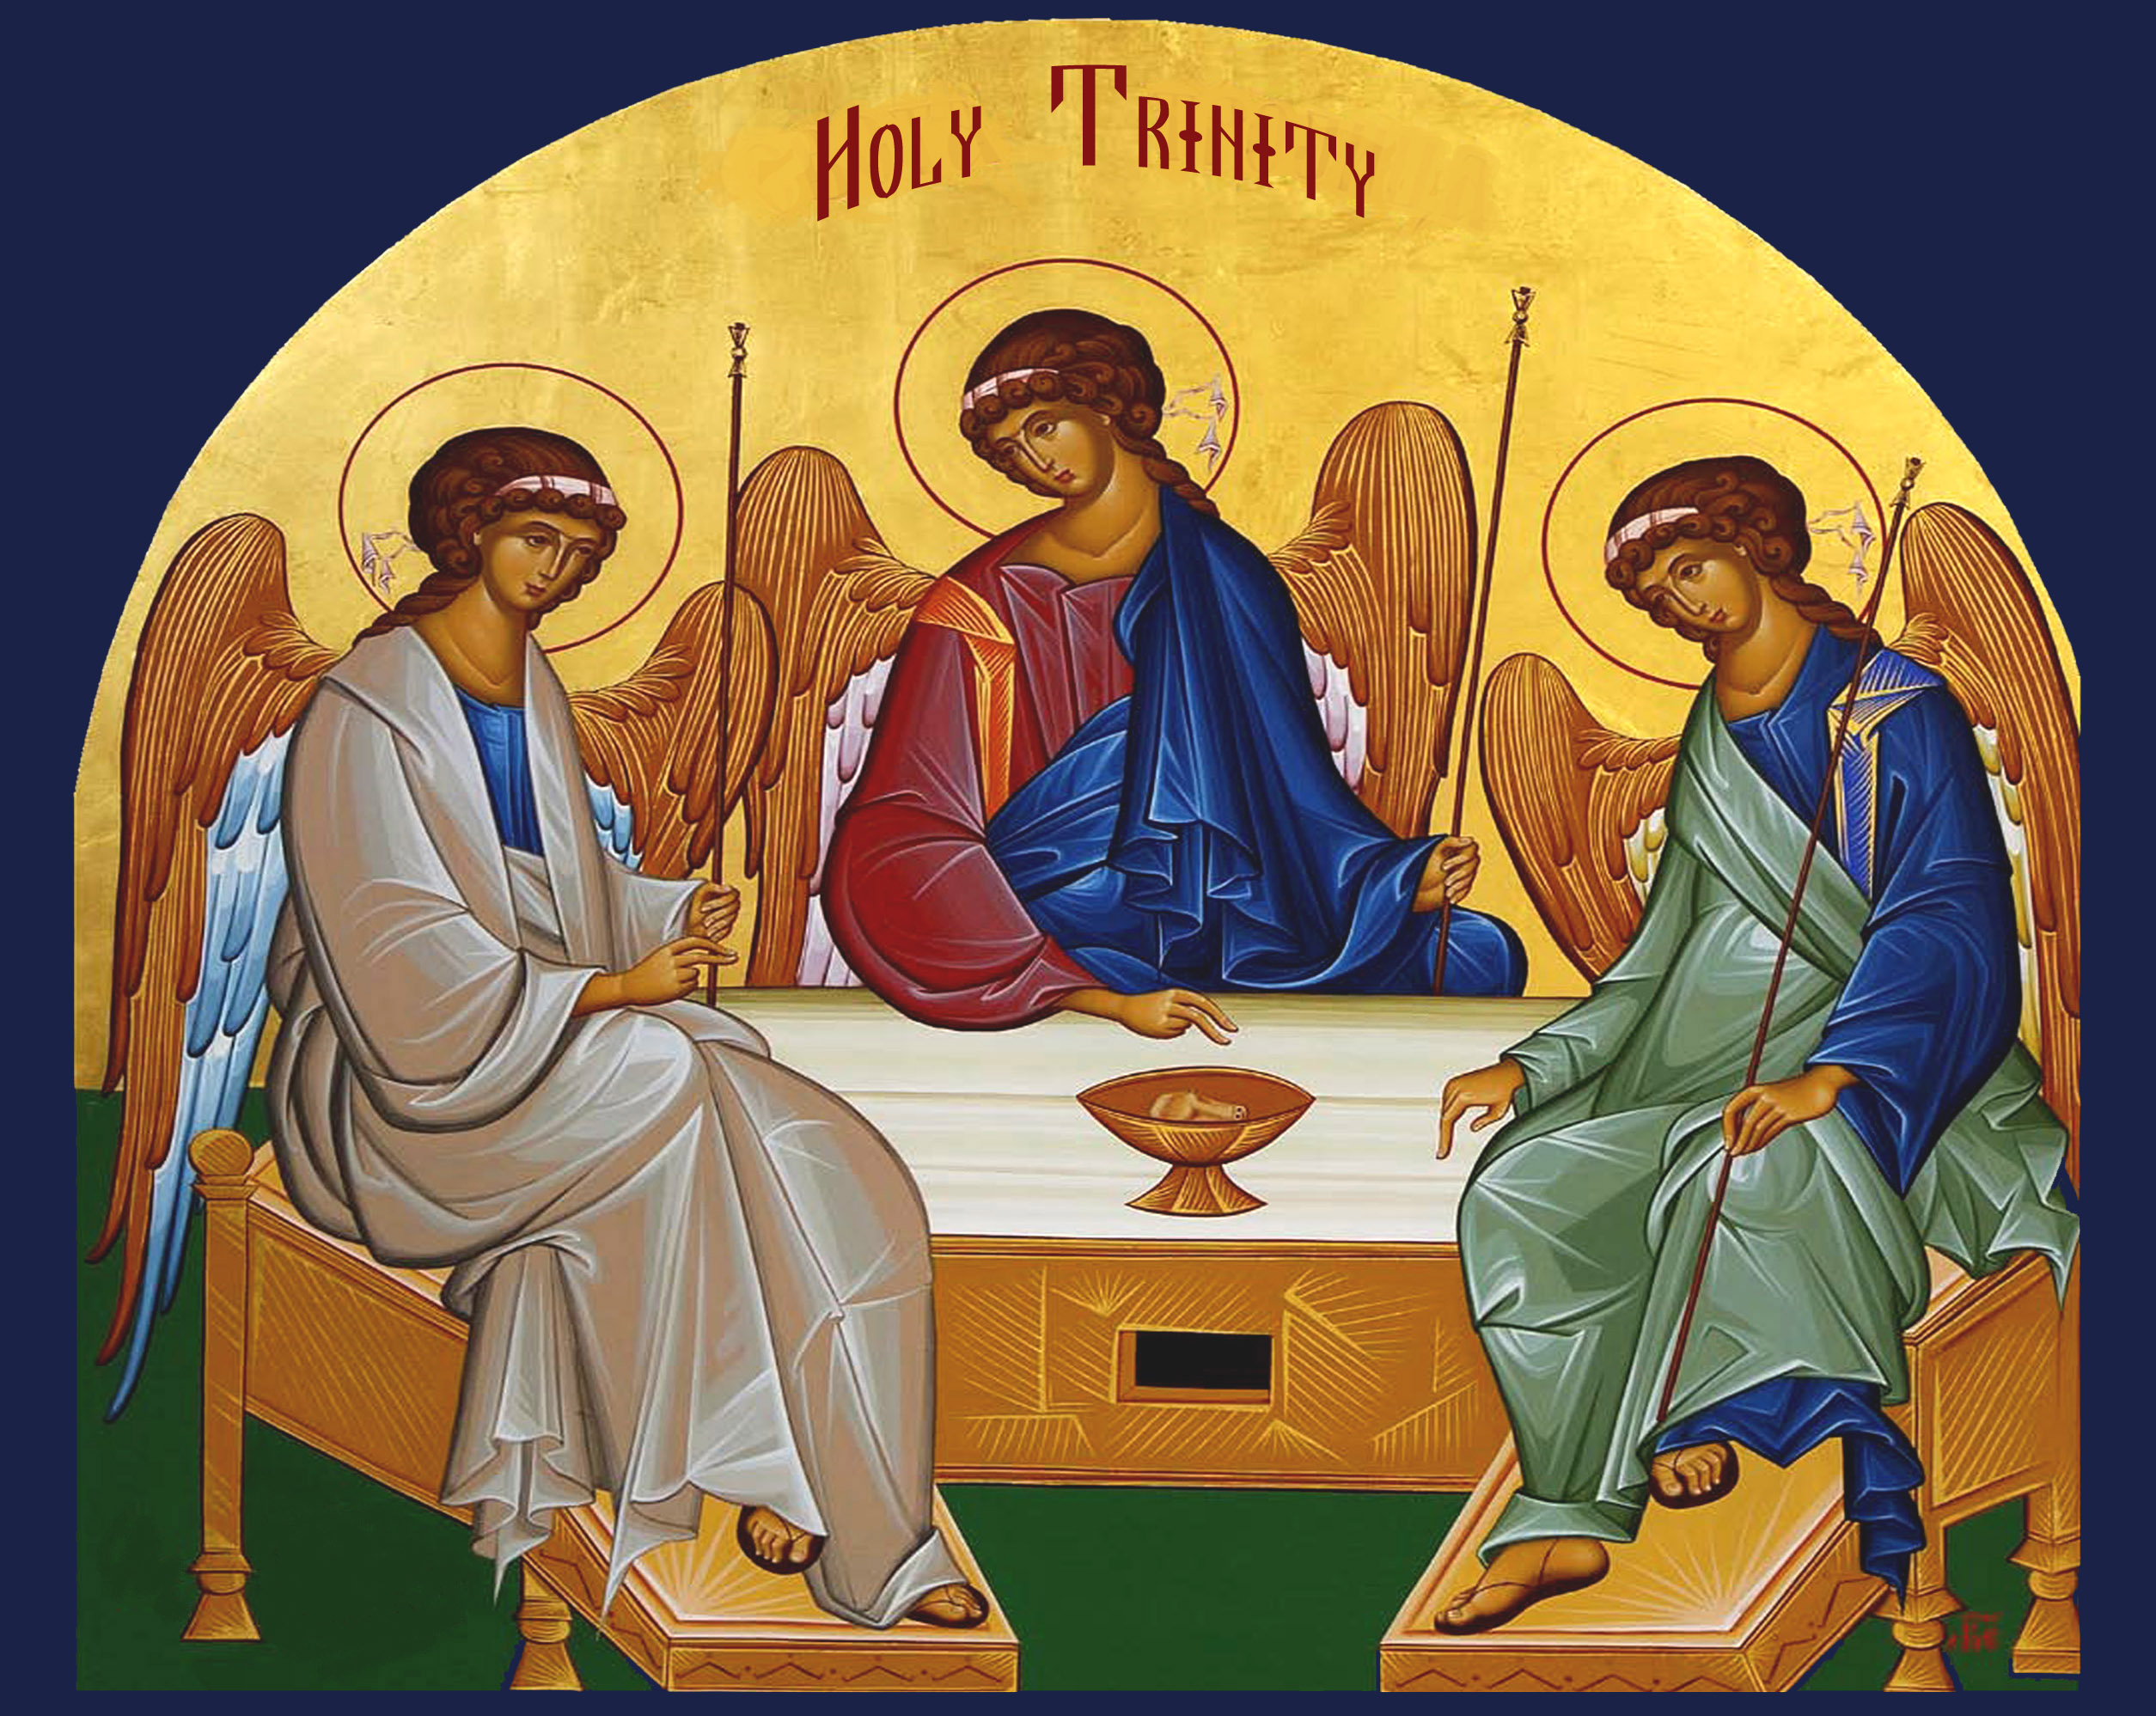 CATHOLIC HOMILIES SOLEMNITY OF THE MOST HOLY TRINITY (YEAR A